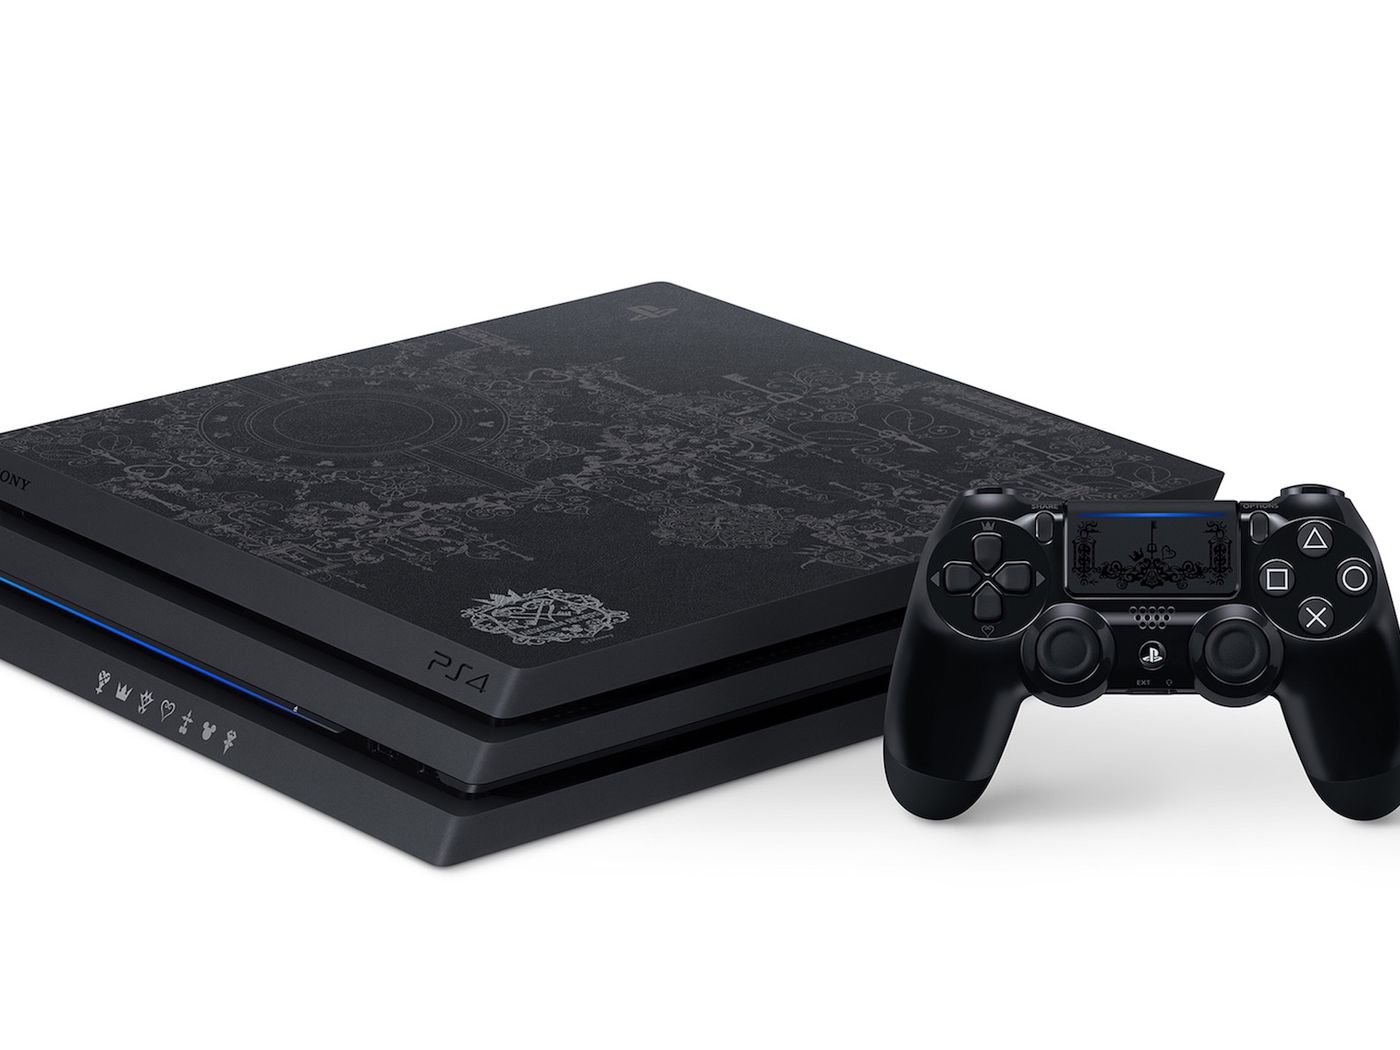 Kingdom Hearts 3 limited edition PS4 Pro: where to buy, price 